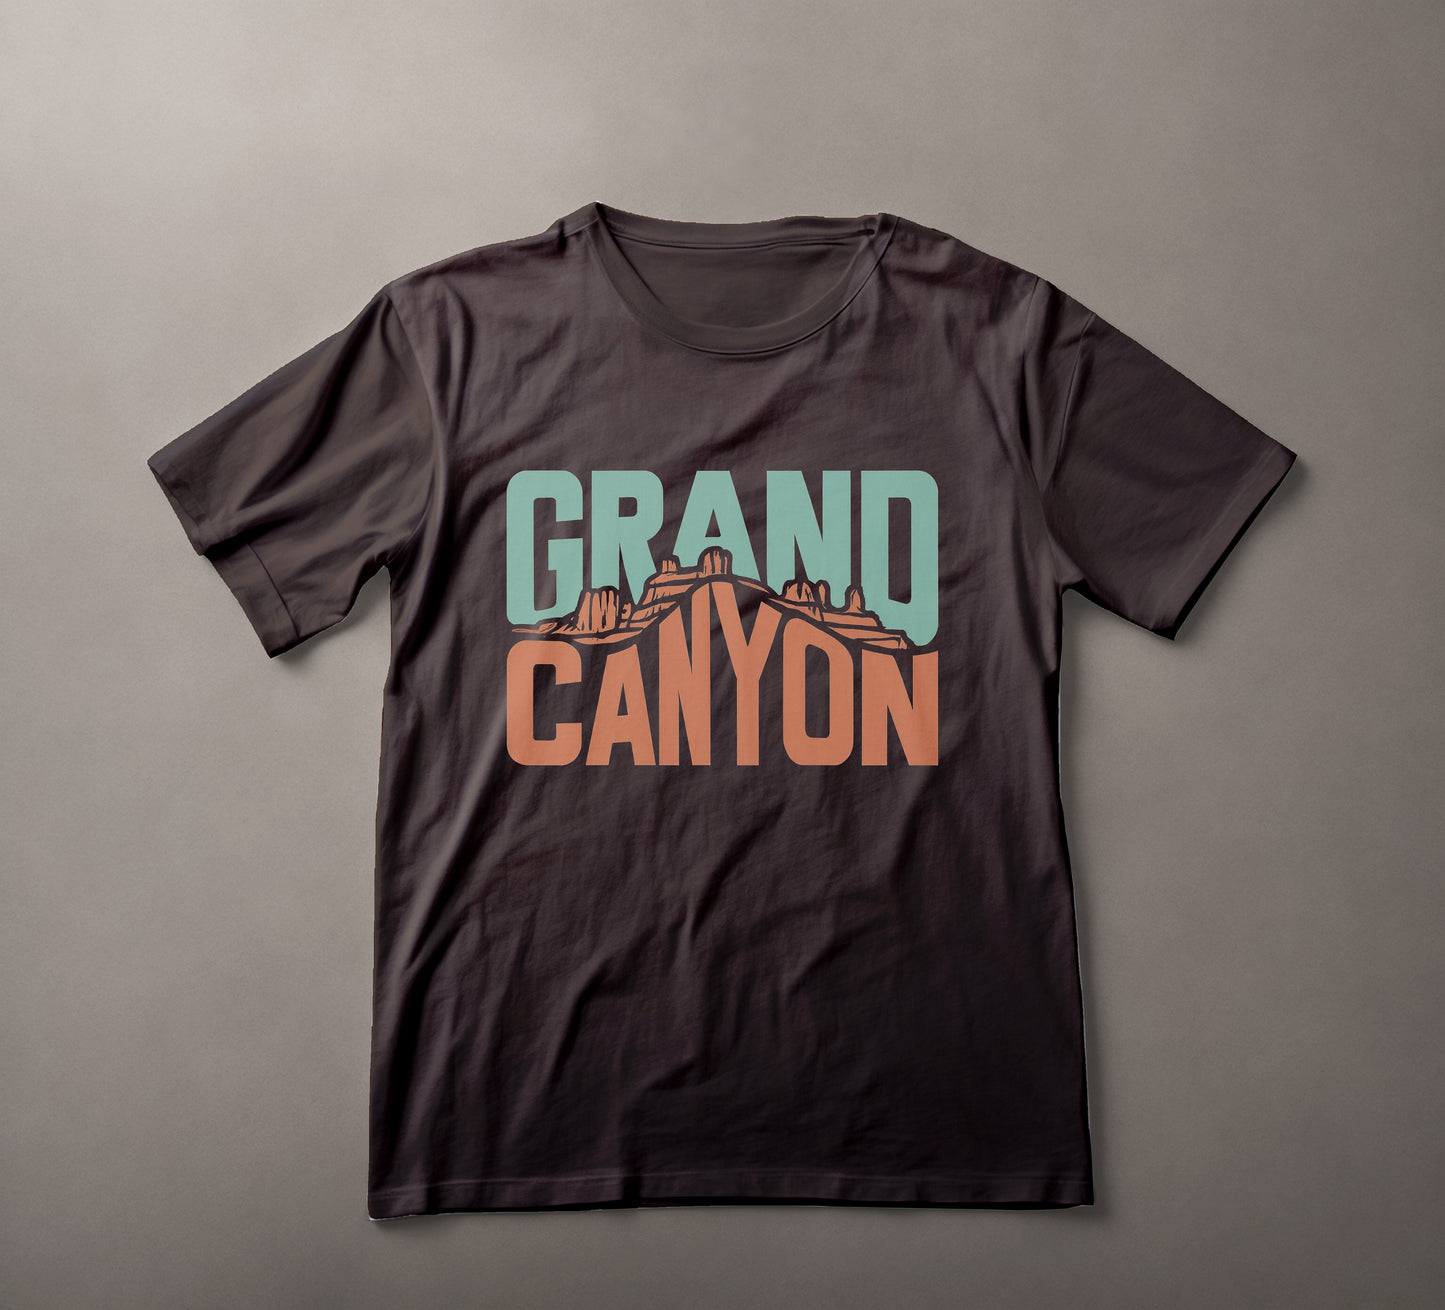 Grand Canyon T-shirt, Nature Inspired Apparel, Adventure Clothing, National Park Souvenir Tee, Majestic Scenery Shirt, Outdoor Enthusiast Gear, Hiking Graphic Tee, Canyon Exploration Wear, Landscape Lover Fashion, Earth Tone Nature Shirt